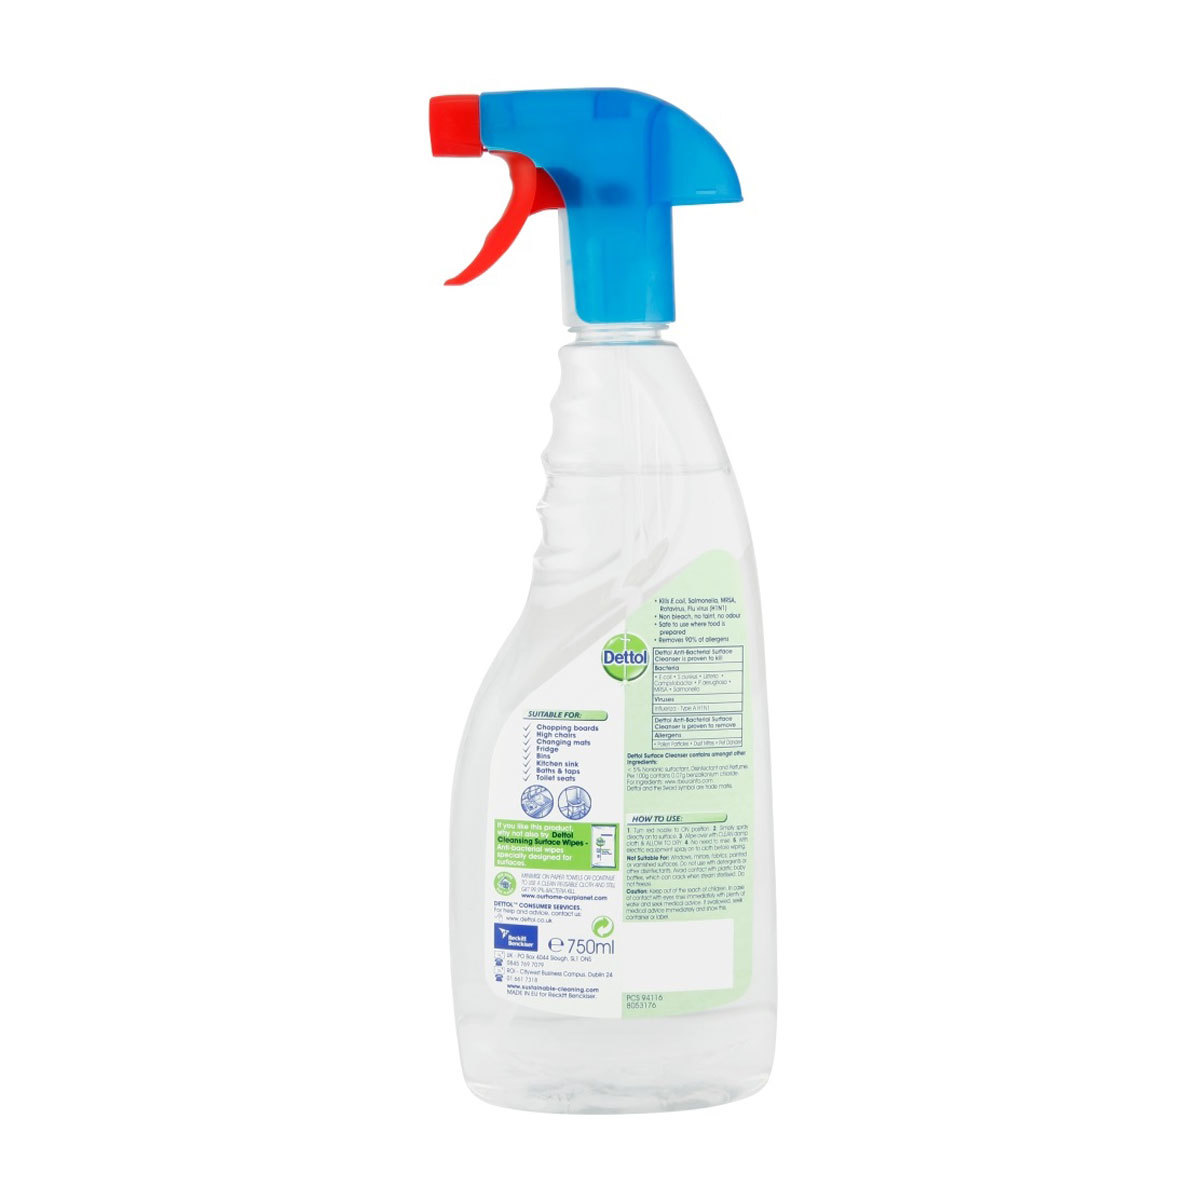 Dettol Antibacterial Surface Cleanser, 4 x 750ml